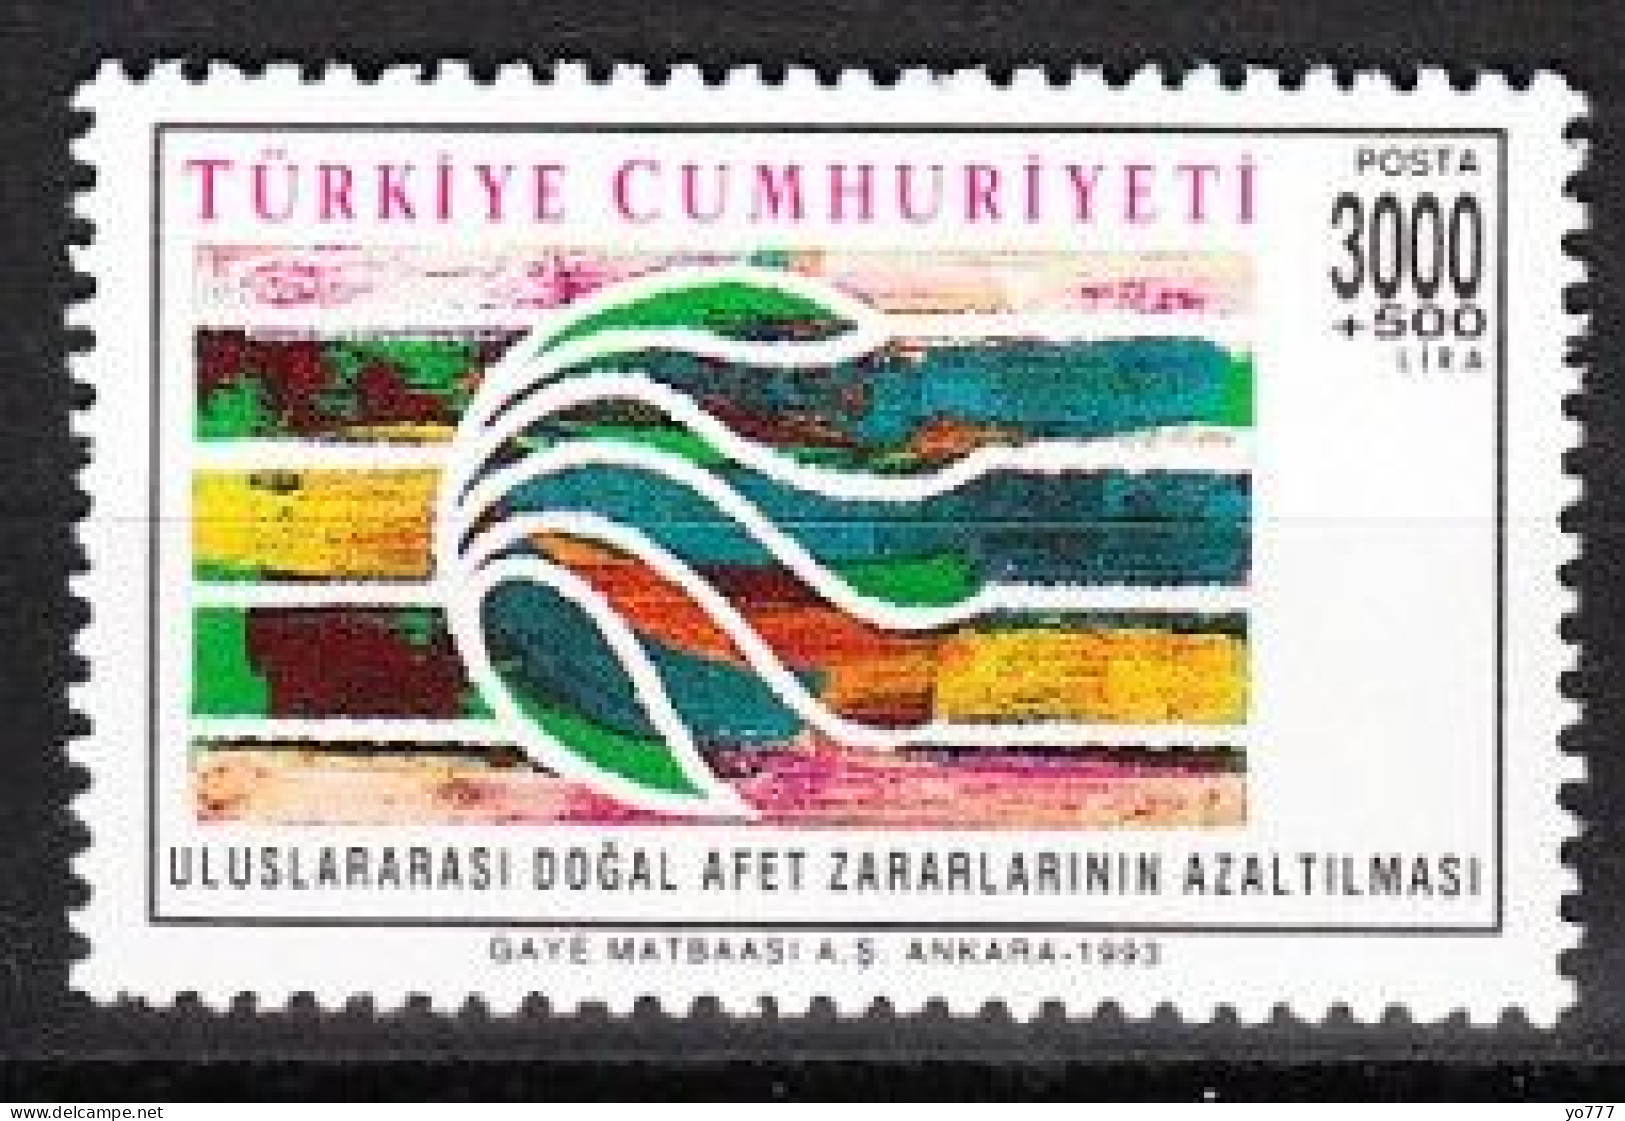 (3004) TURKEY INTERNATIONAL DAY FOR NATURAL DISASTER REDUCTION MNH** - Nuevos